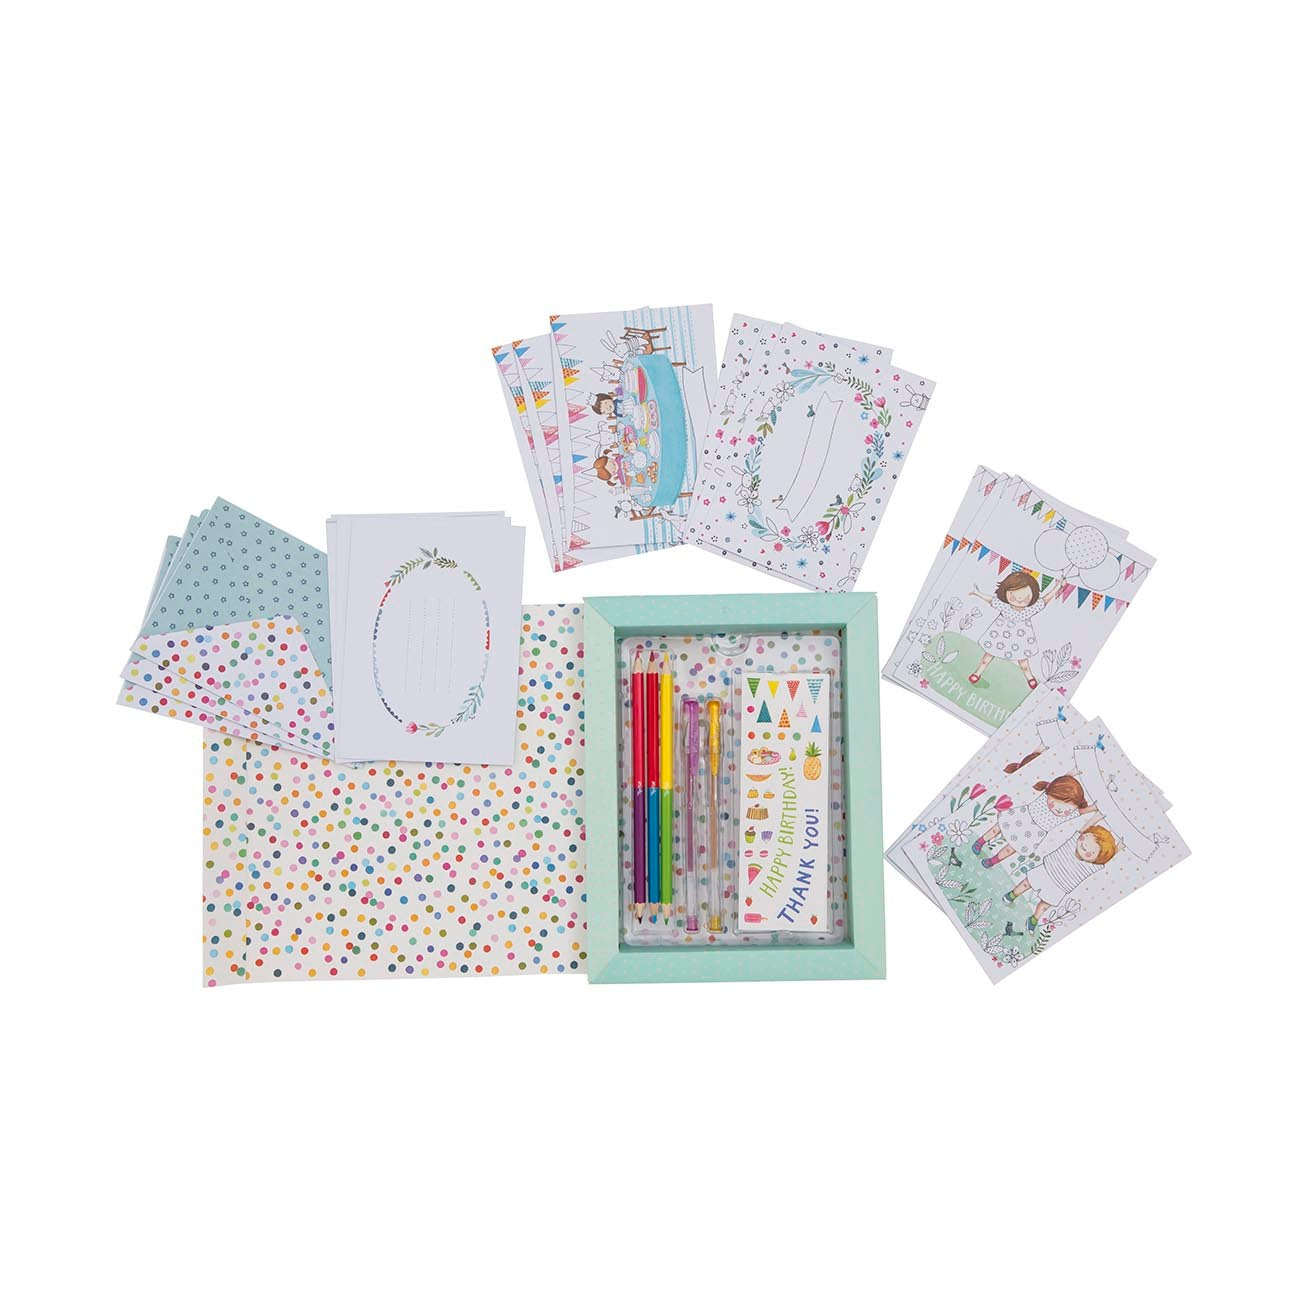 Card Making Kit - Party